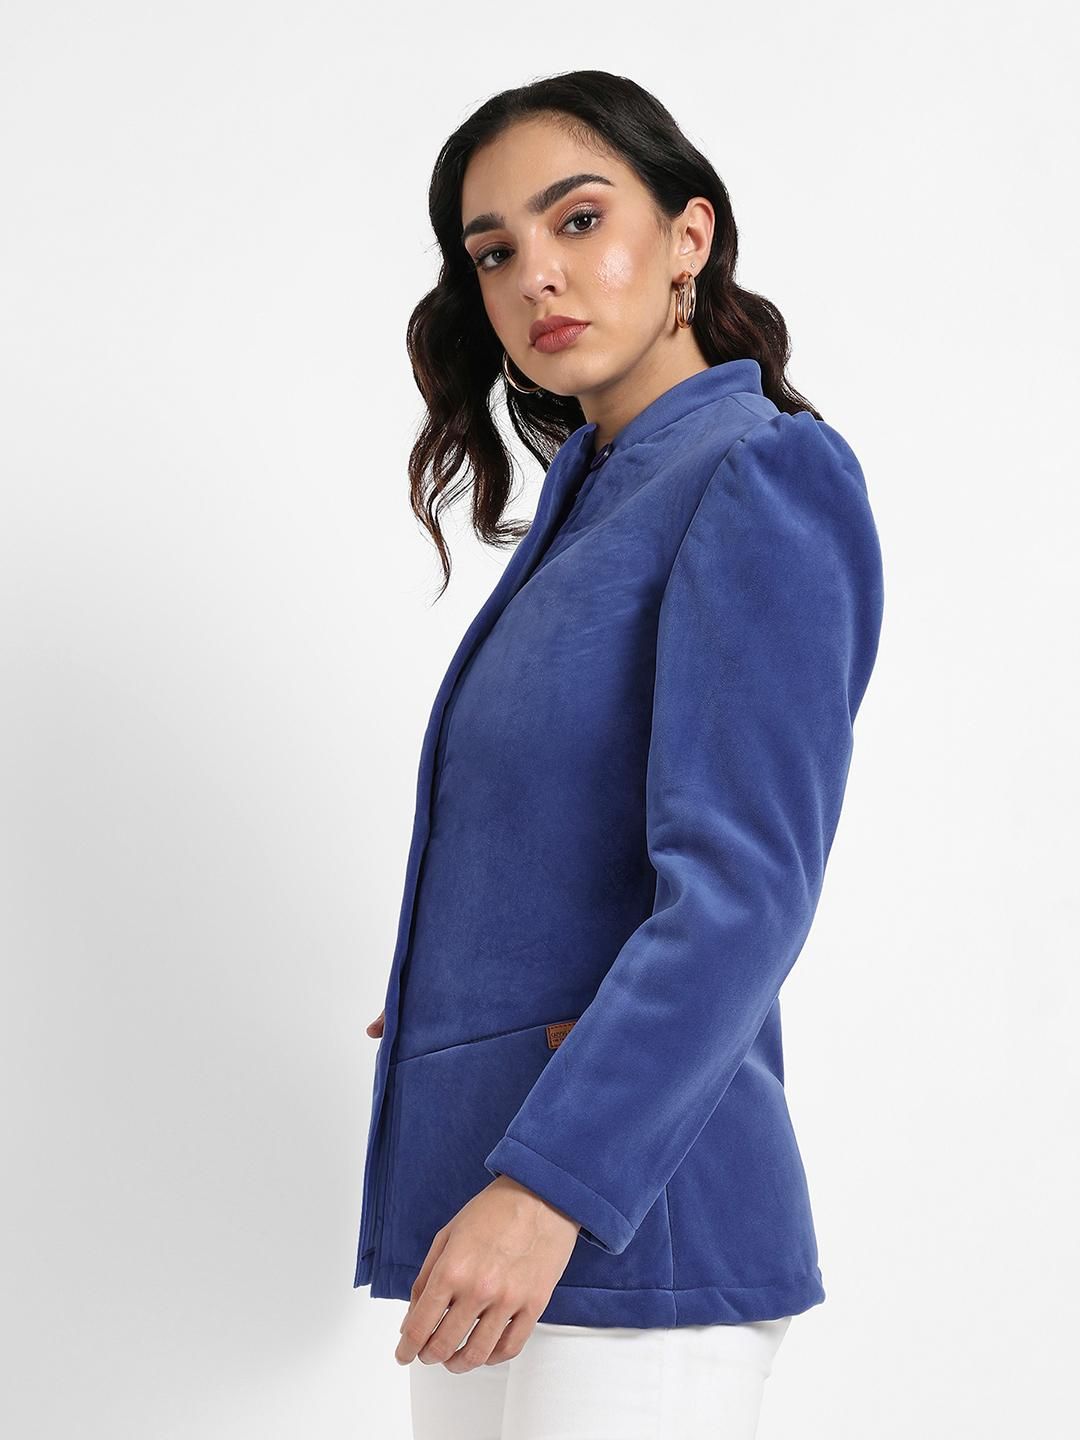 Campus Sutra Women's Single-Breasted Blazer With Power Shoulders